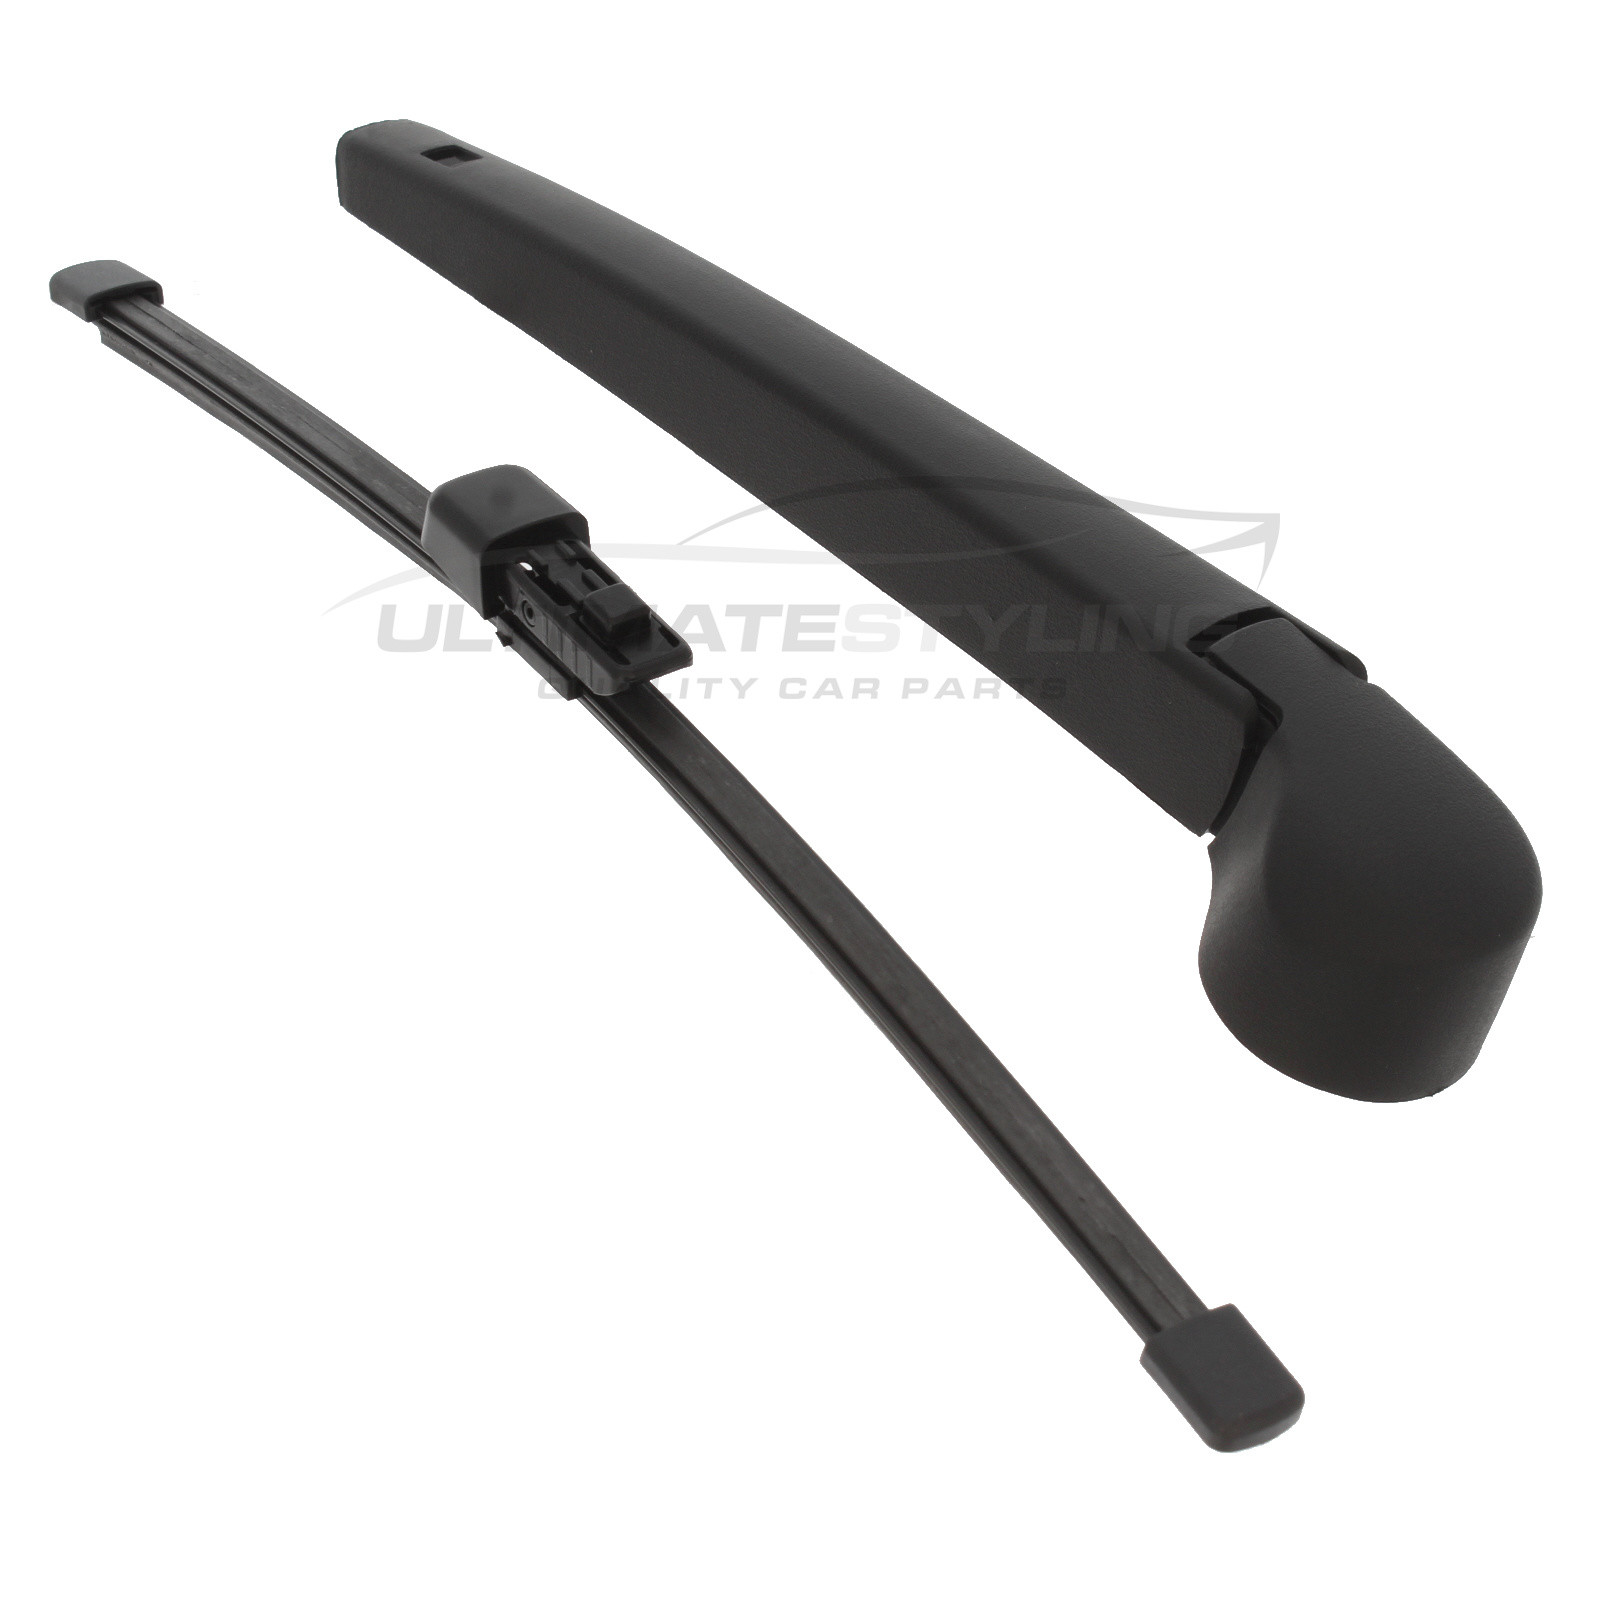 Rear Wiper Arm & Blade Set for Seat Leon